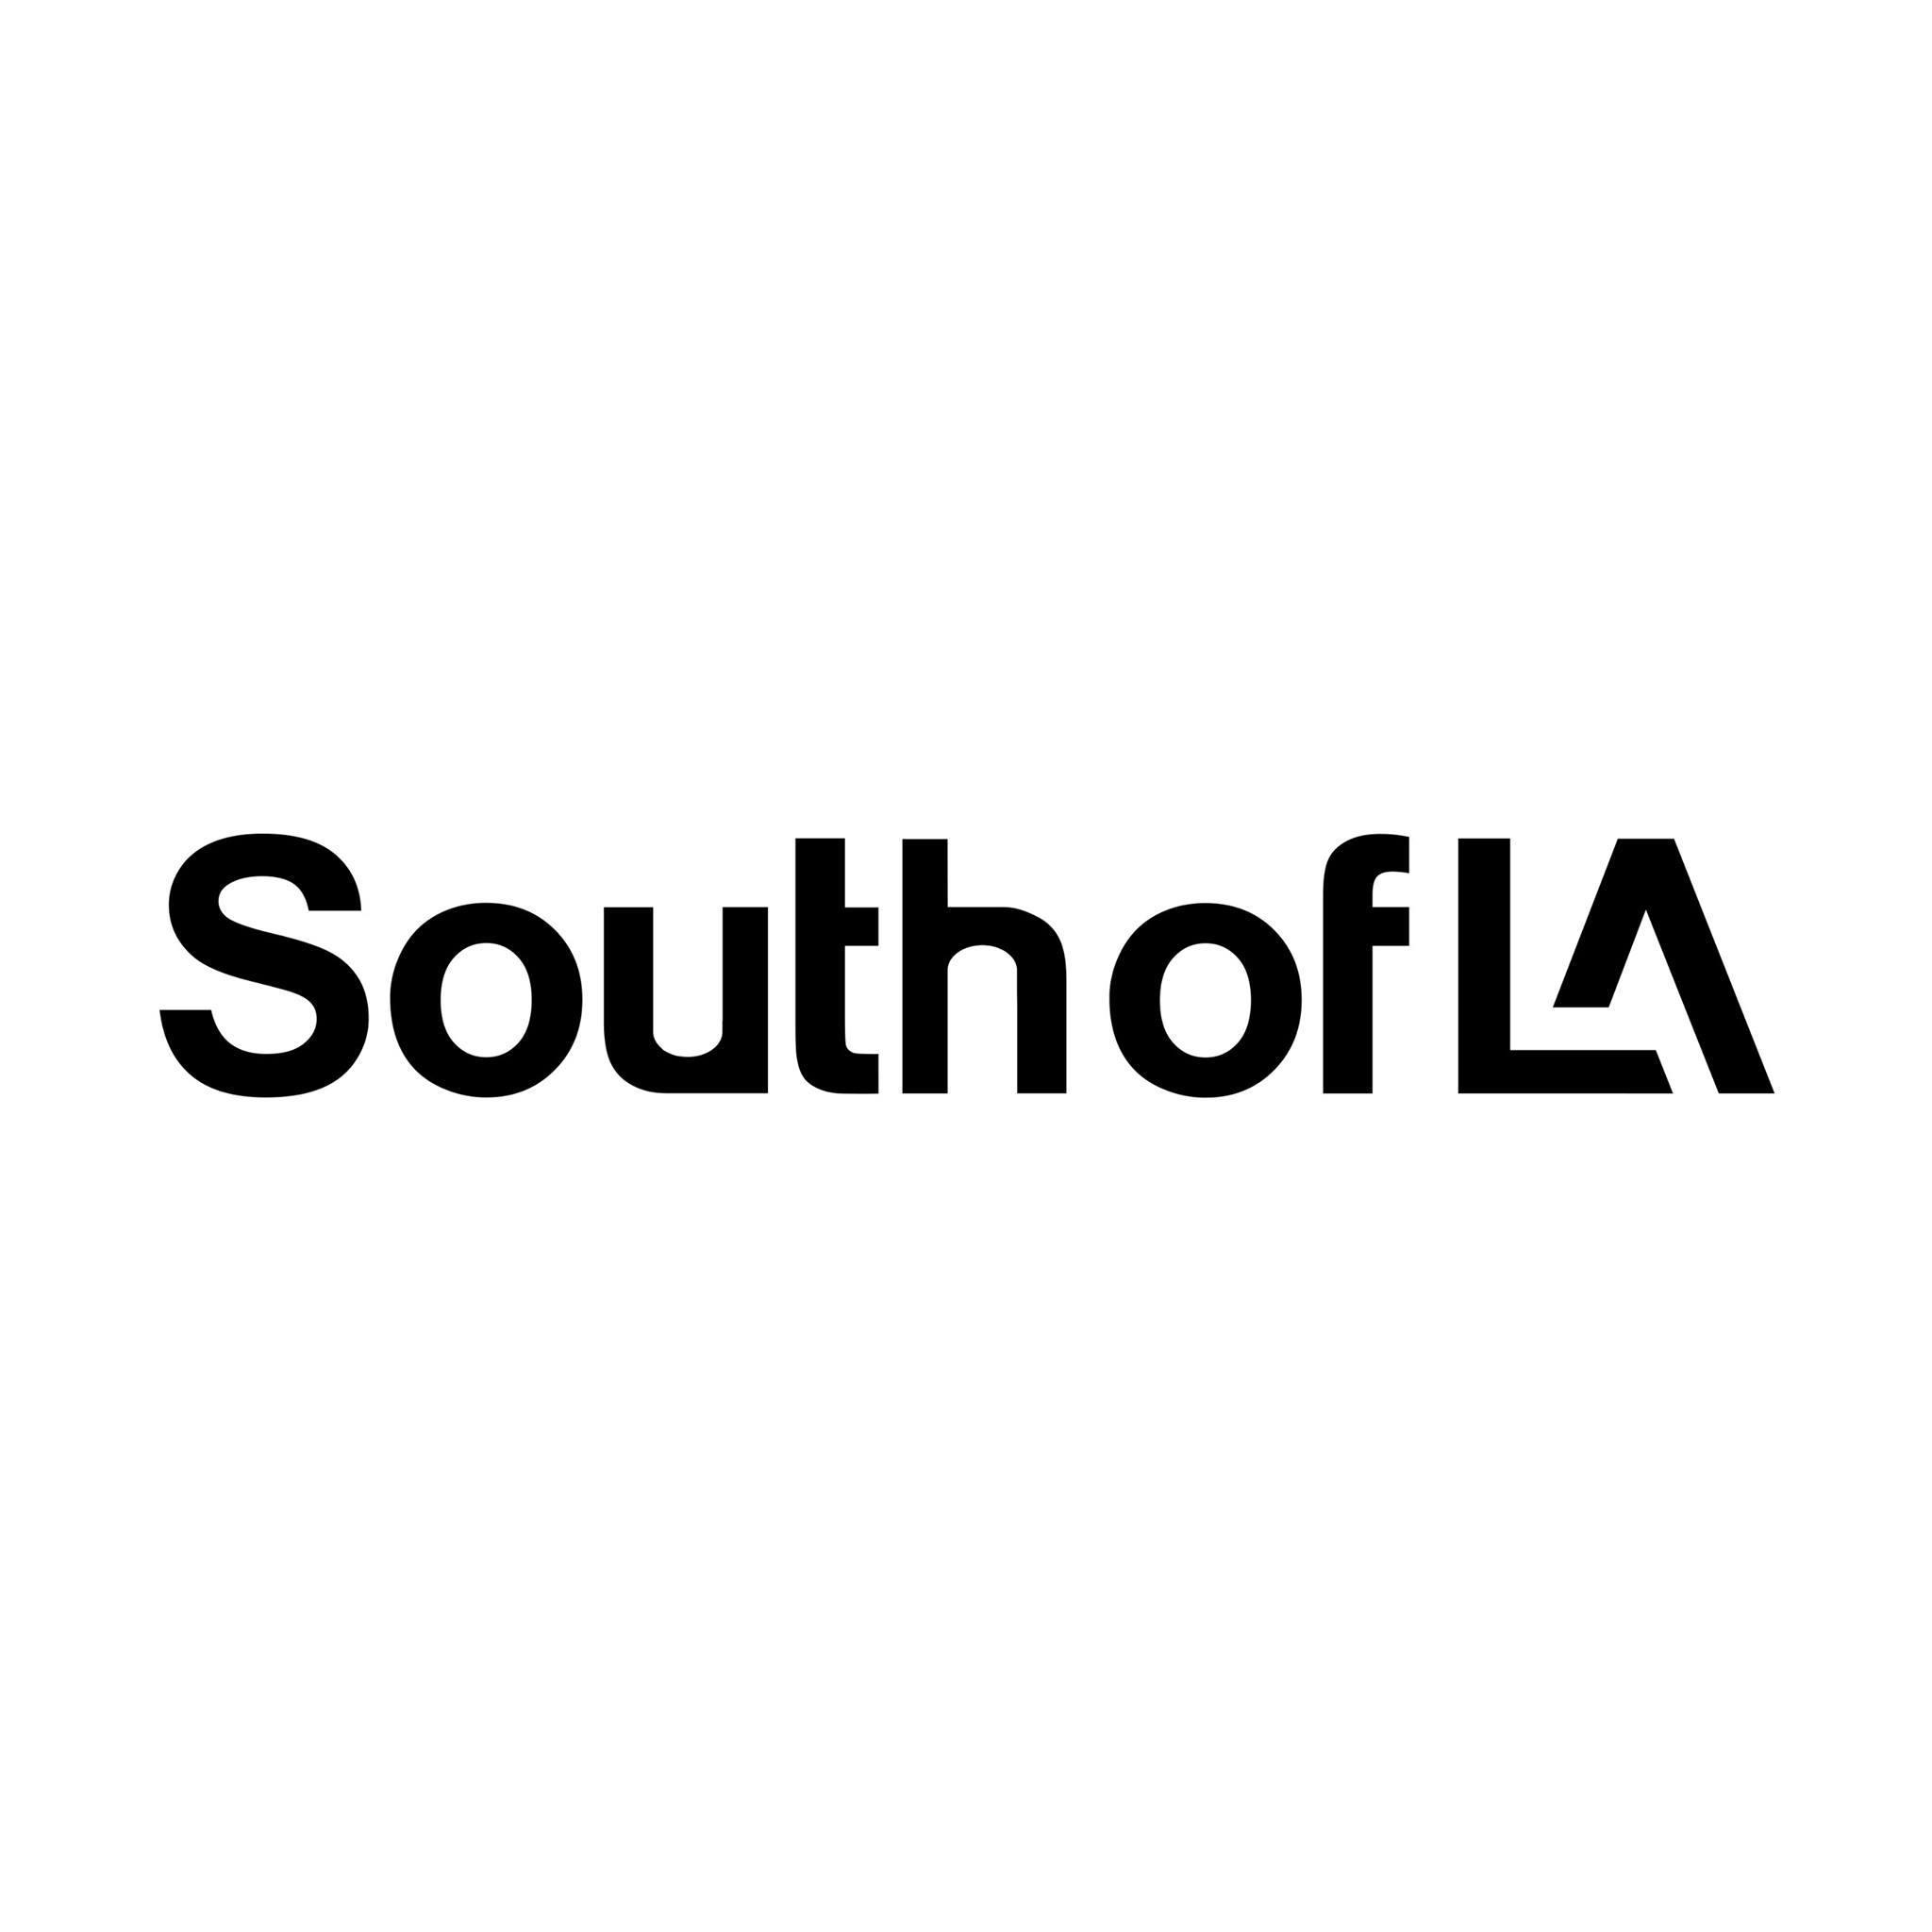 South of LA profile on Qualified.One